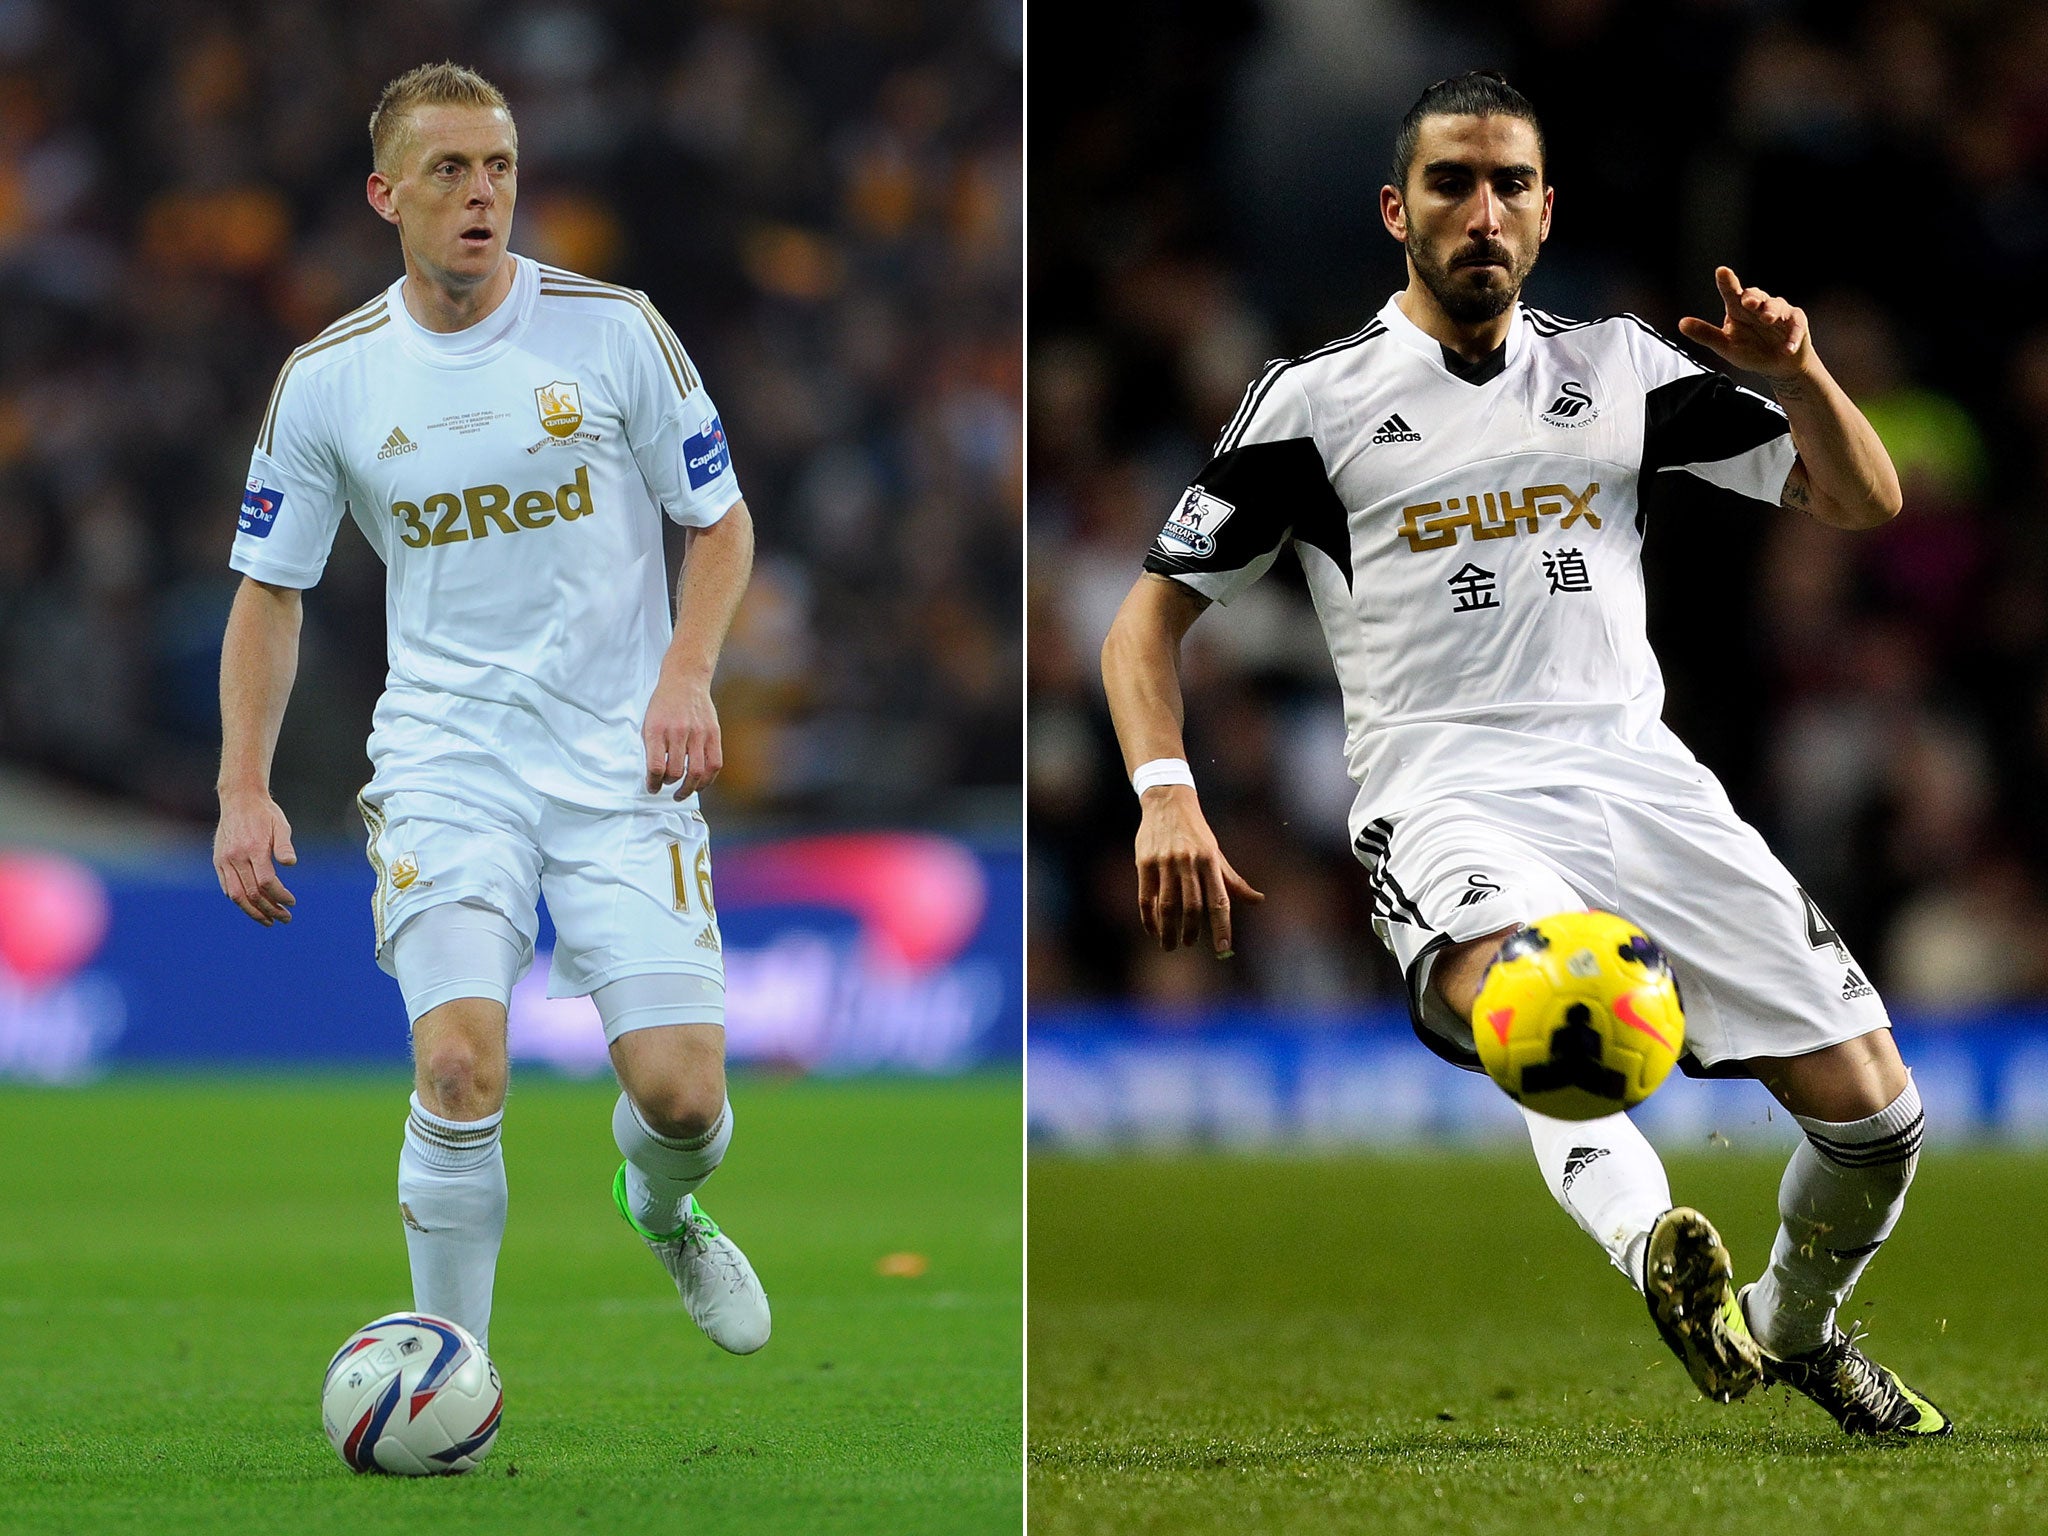 Garry Monk and Chico Flores were involved in a training ground bust-up last week, the club have confirmed